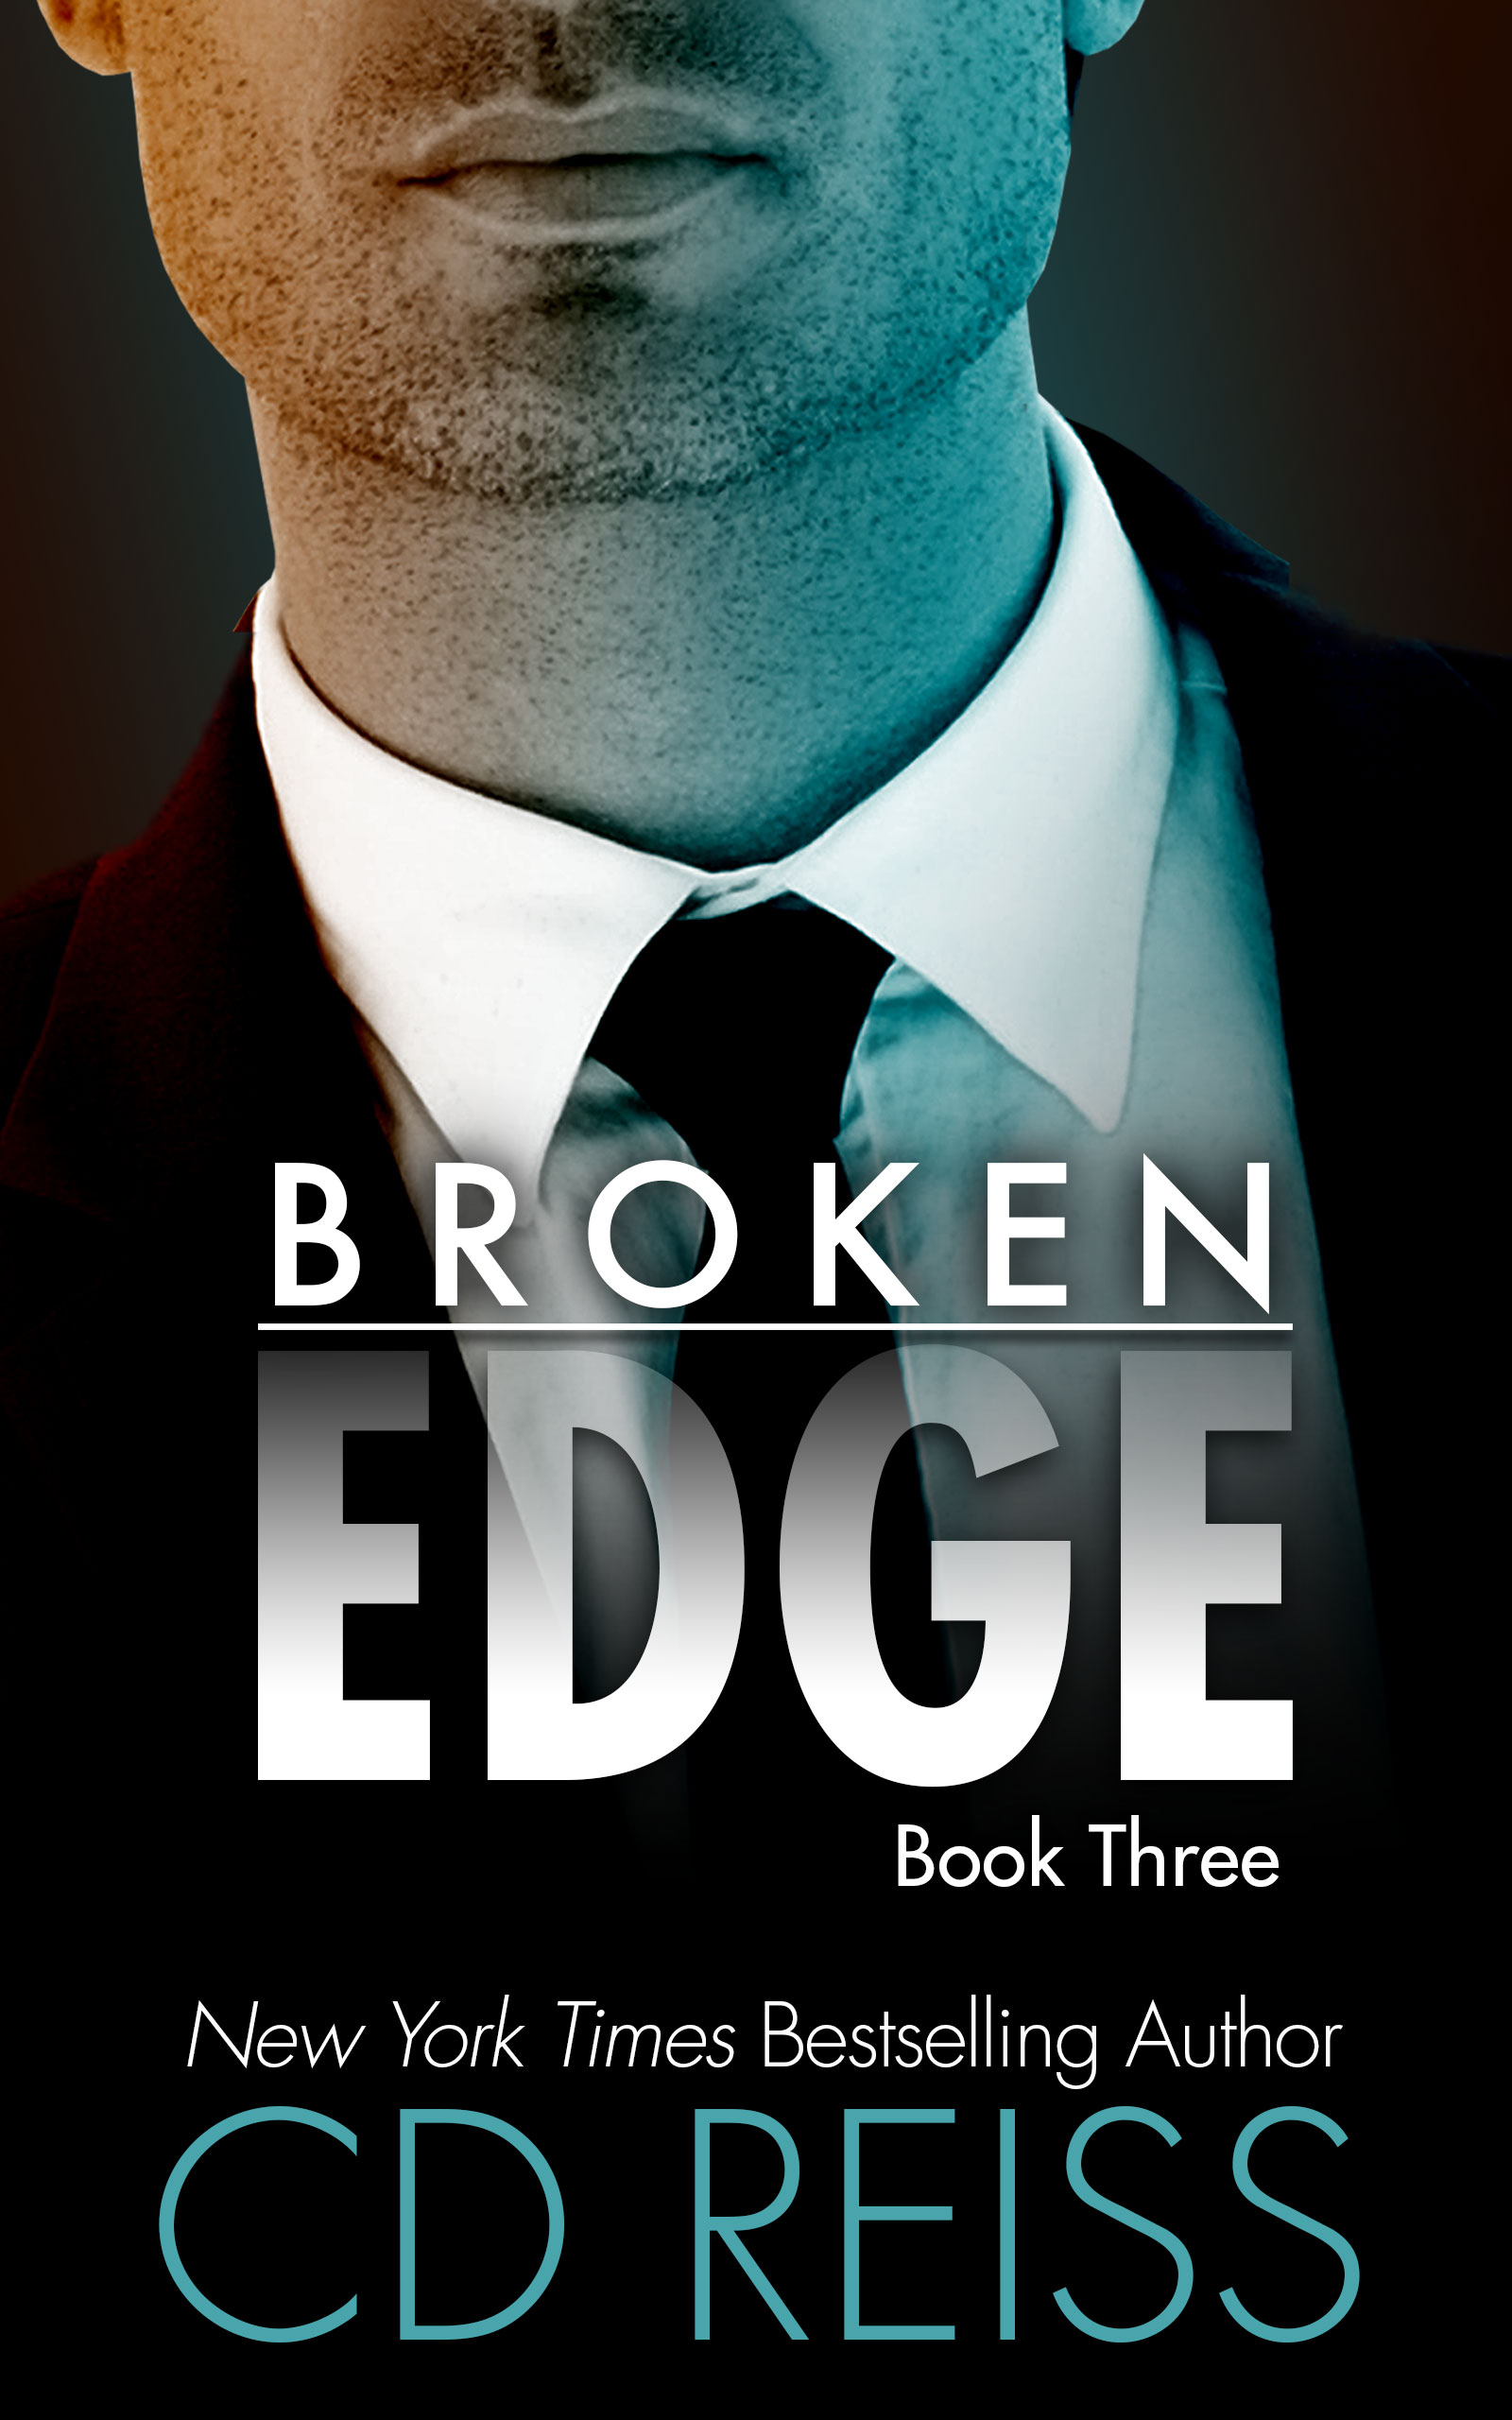 Broken Edge, book three of the new Edge Series by New York Times bestselling Romance Author CD Reiss